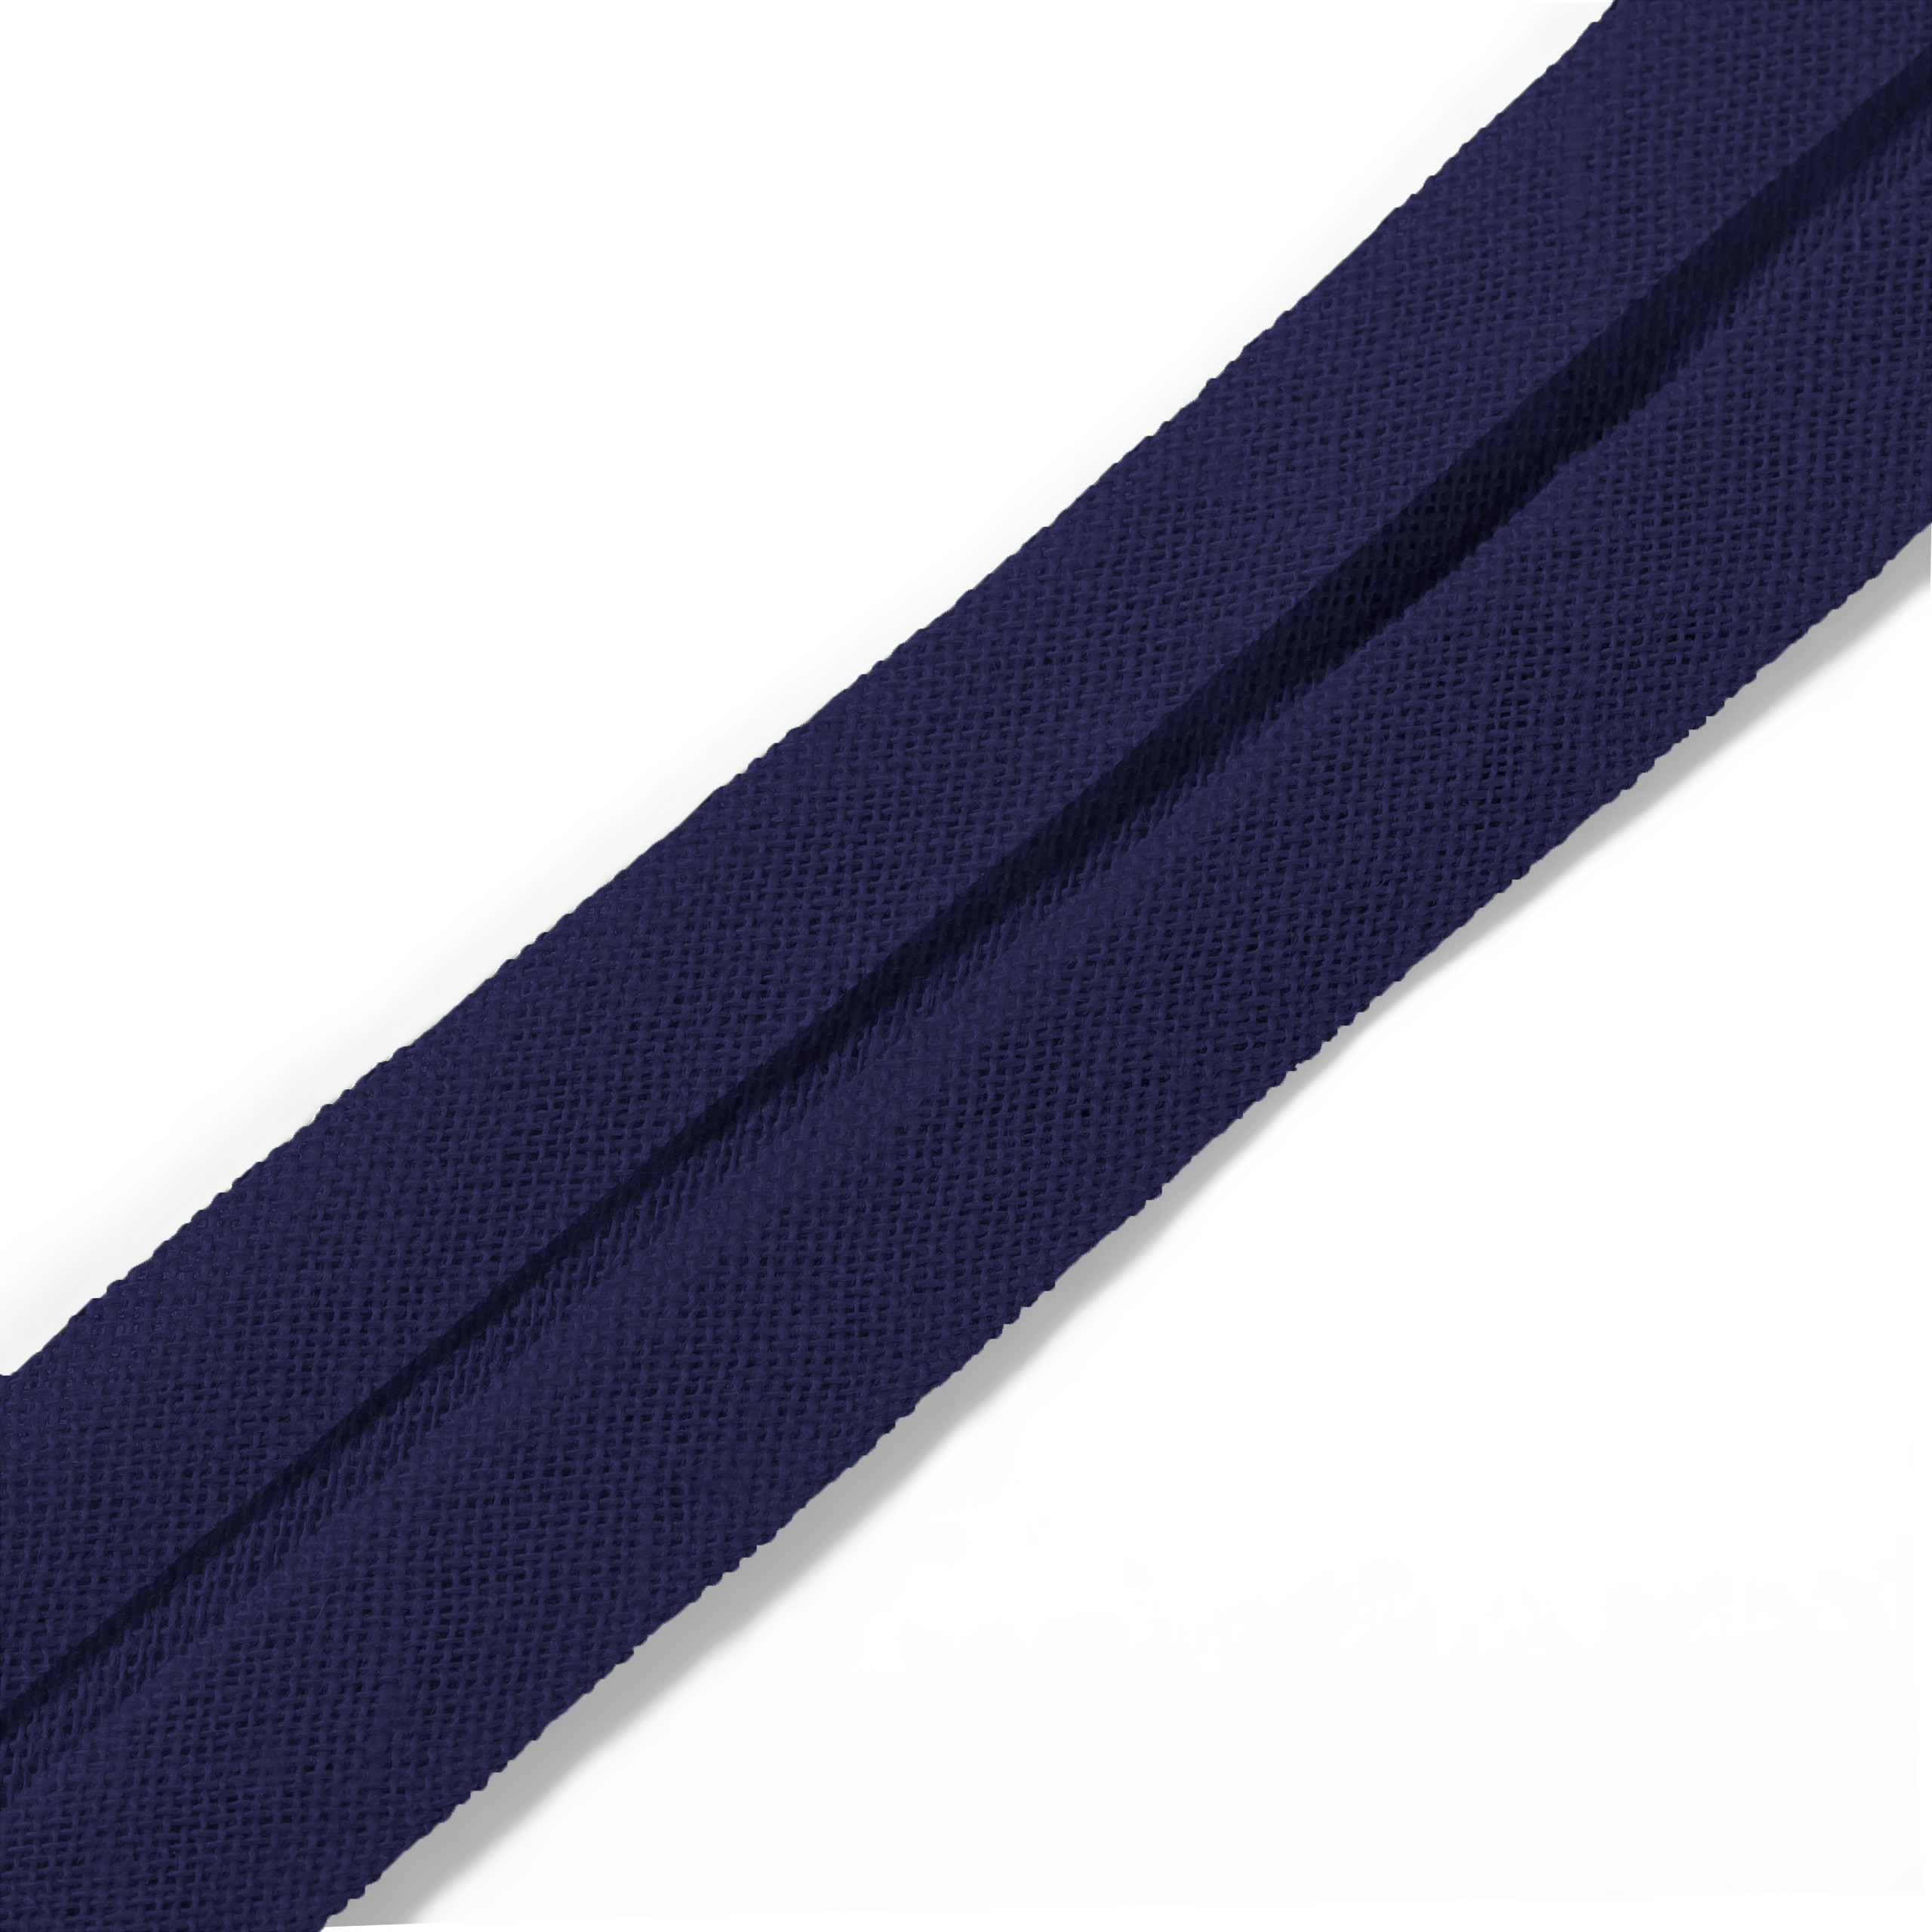 Bias Binding Cotton 40/20 mm navy blue, available by meter